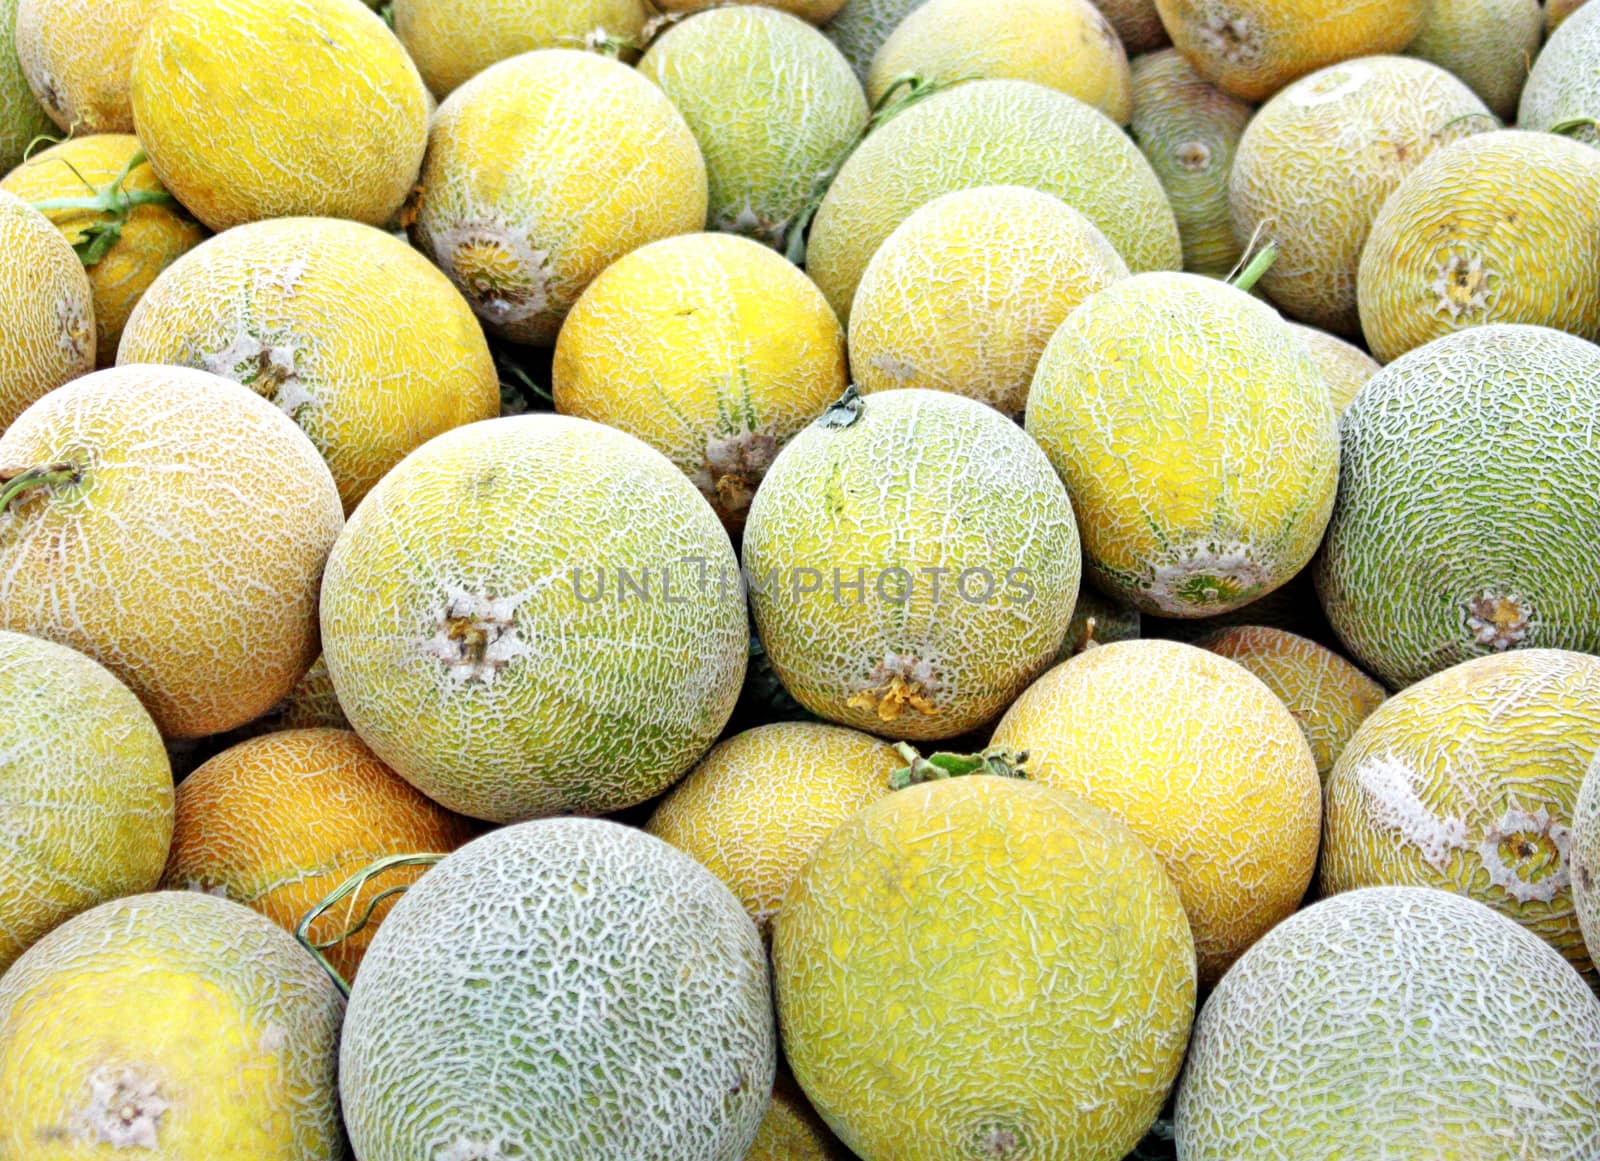 Yellow melons
